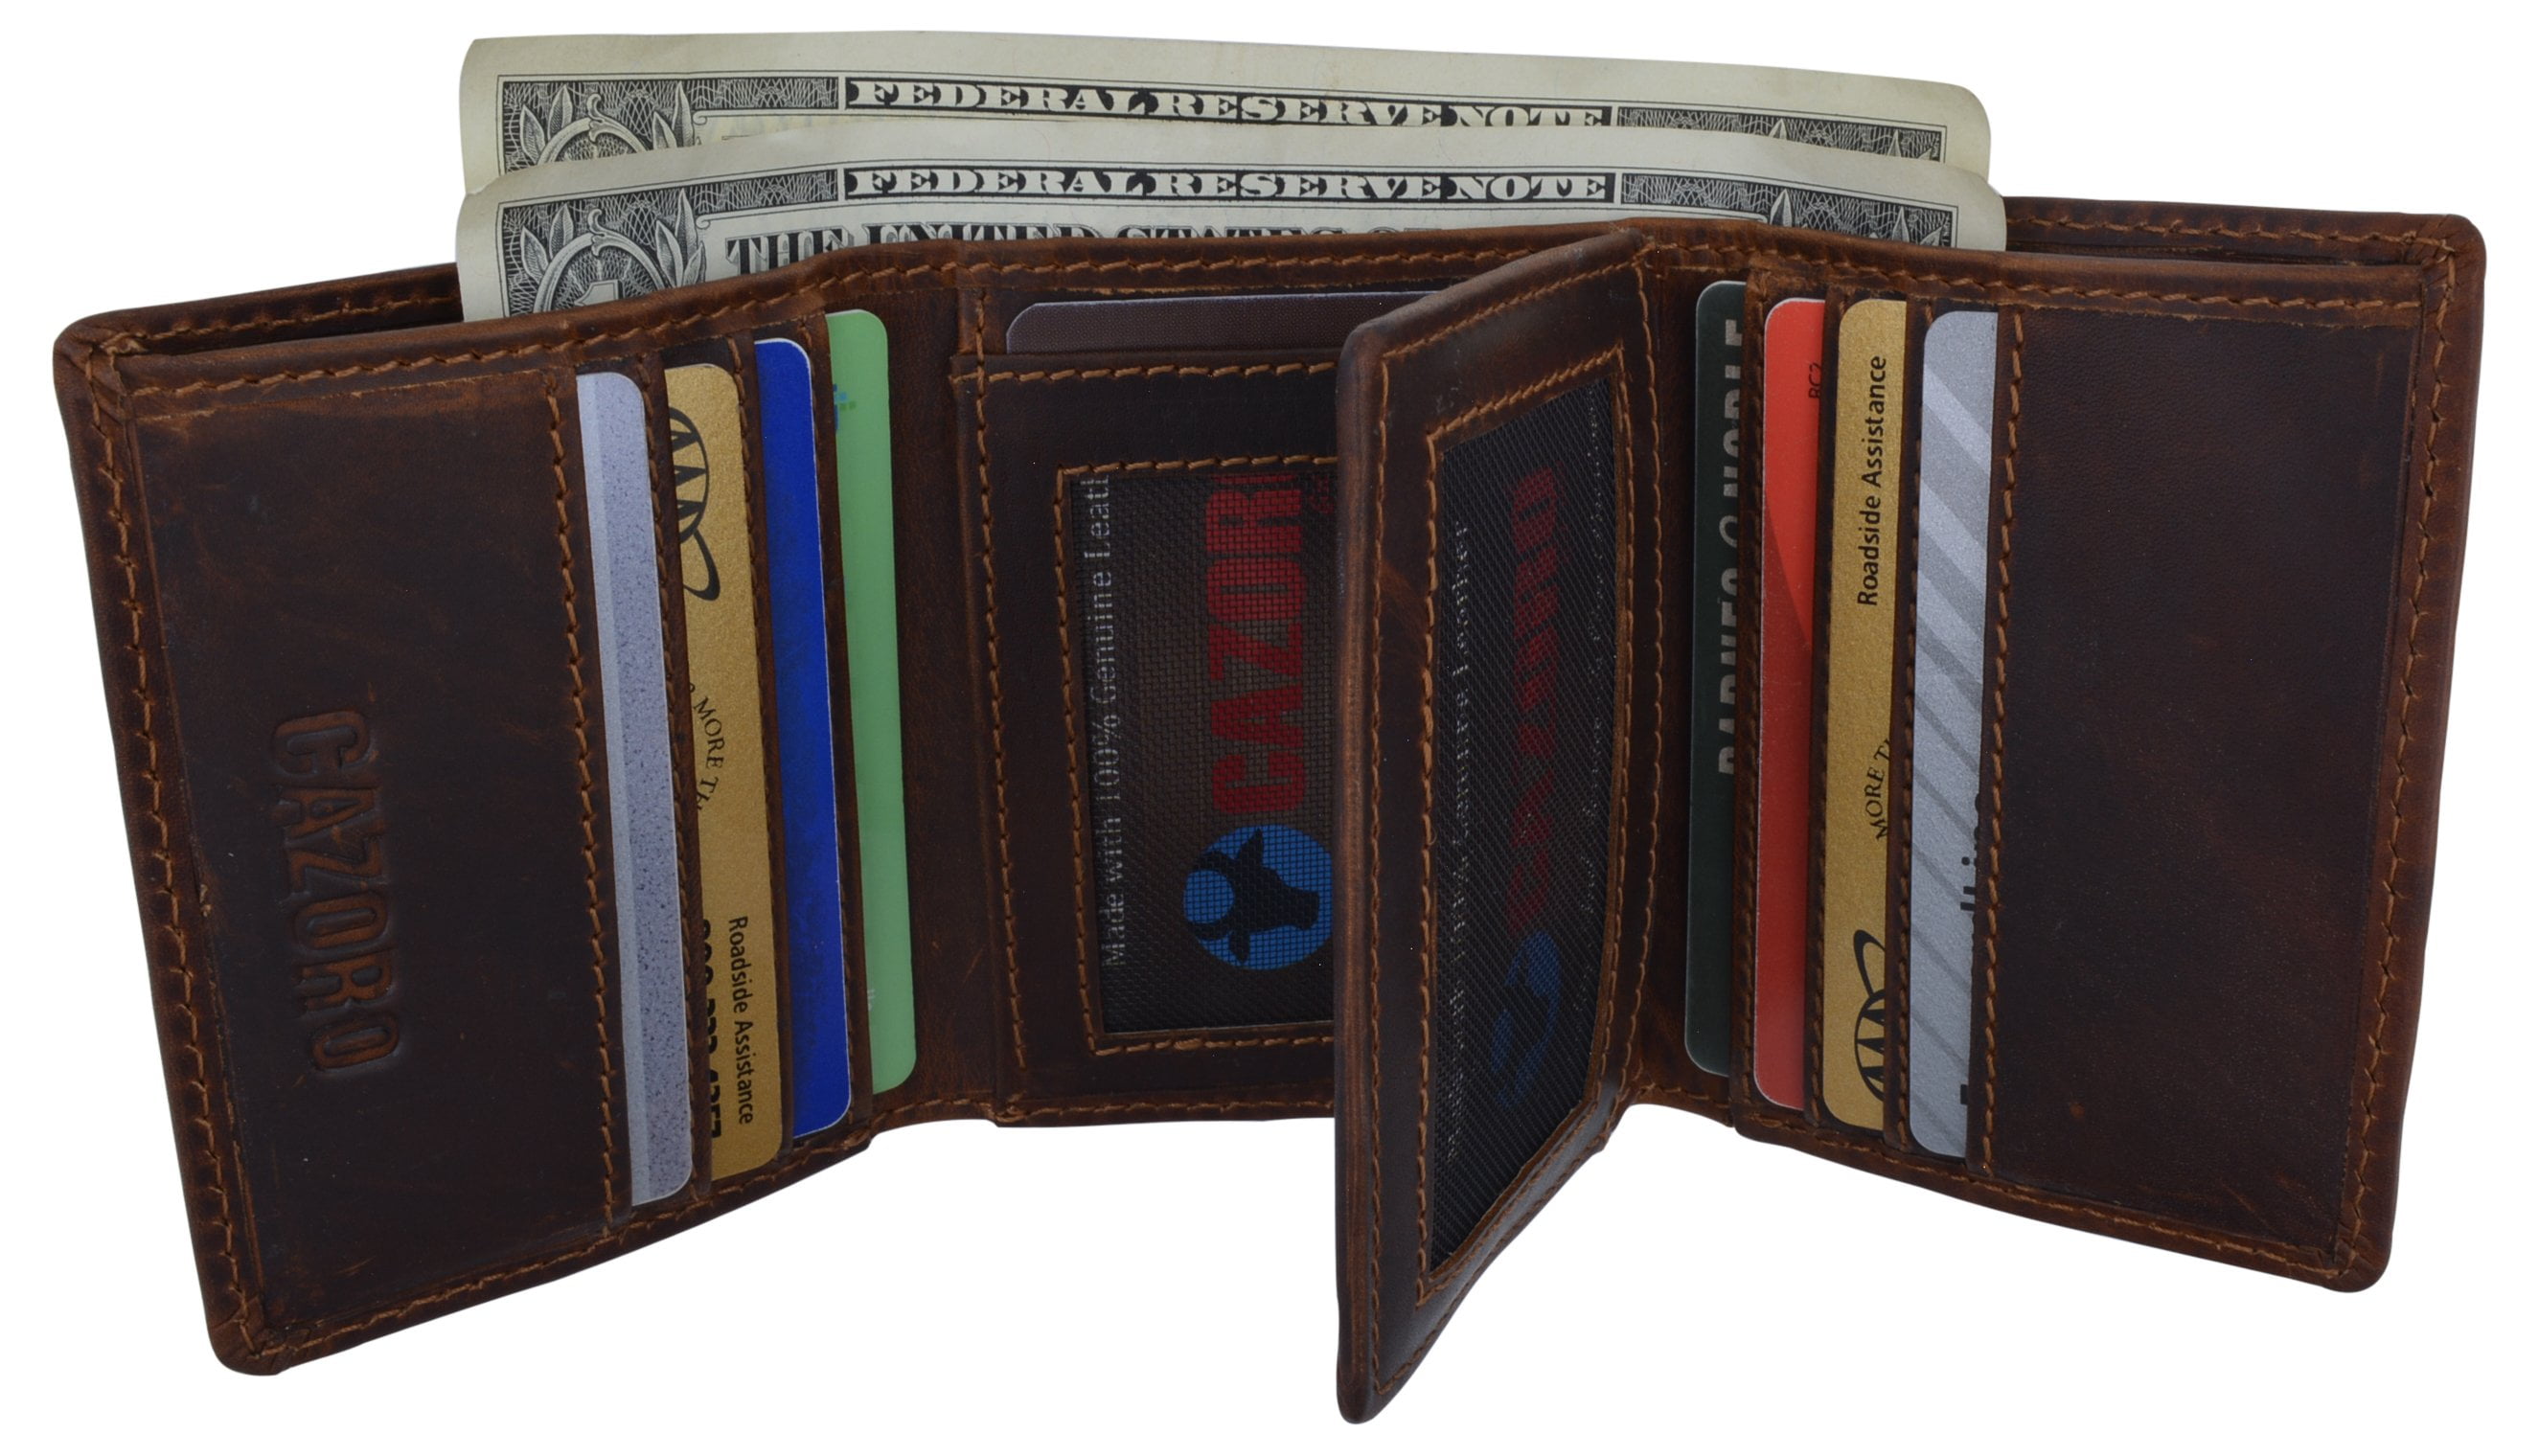 Men's Wallet RFID Blocking Genuine Leather Trifold Wallet 8 Card 3 ID BN in Box